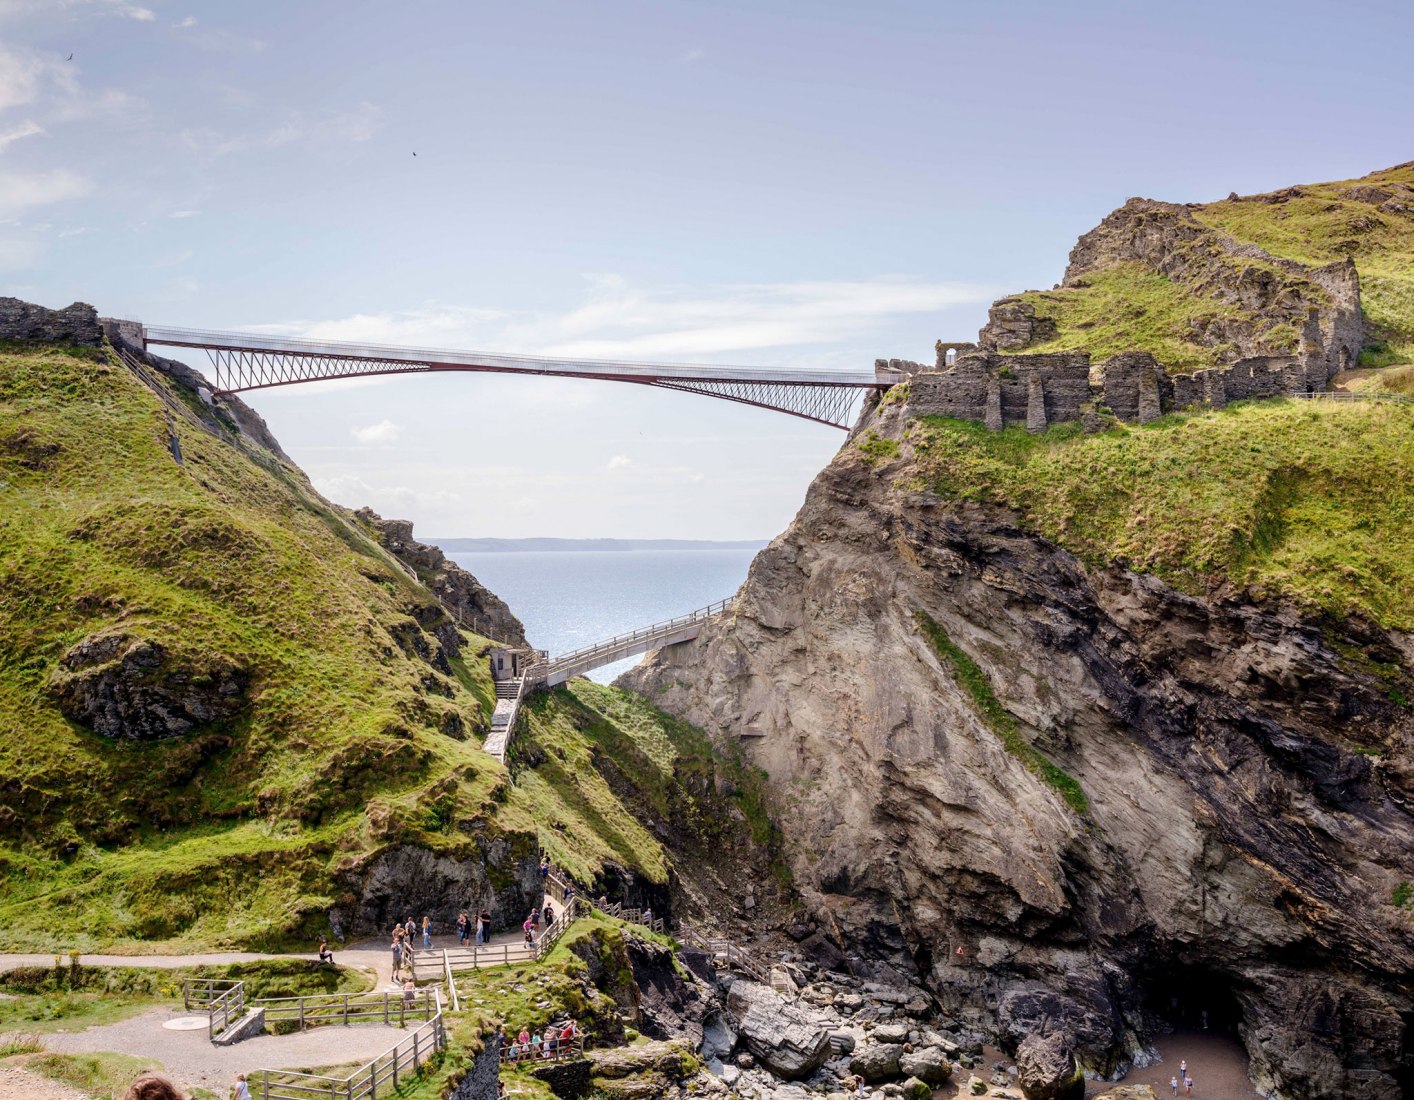 Tintagel footbridge by William Matthews and Ney & Partners. Photograph by Jim Holden/English Heritage